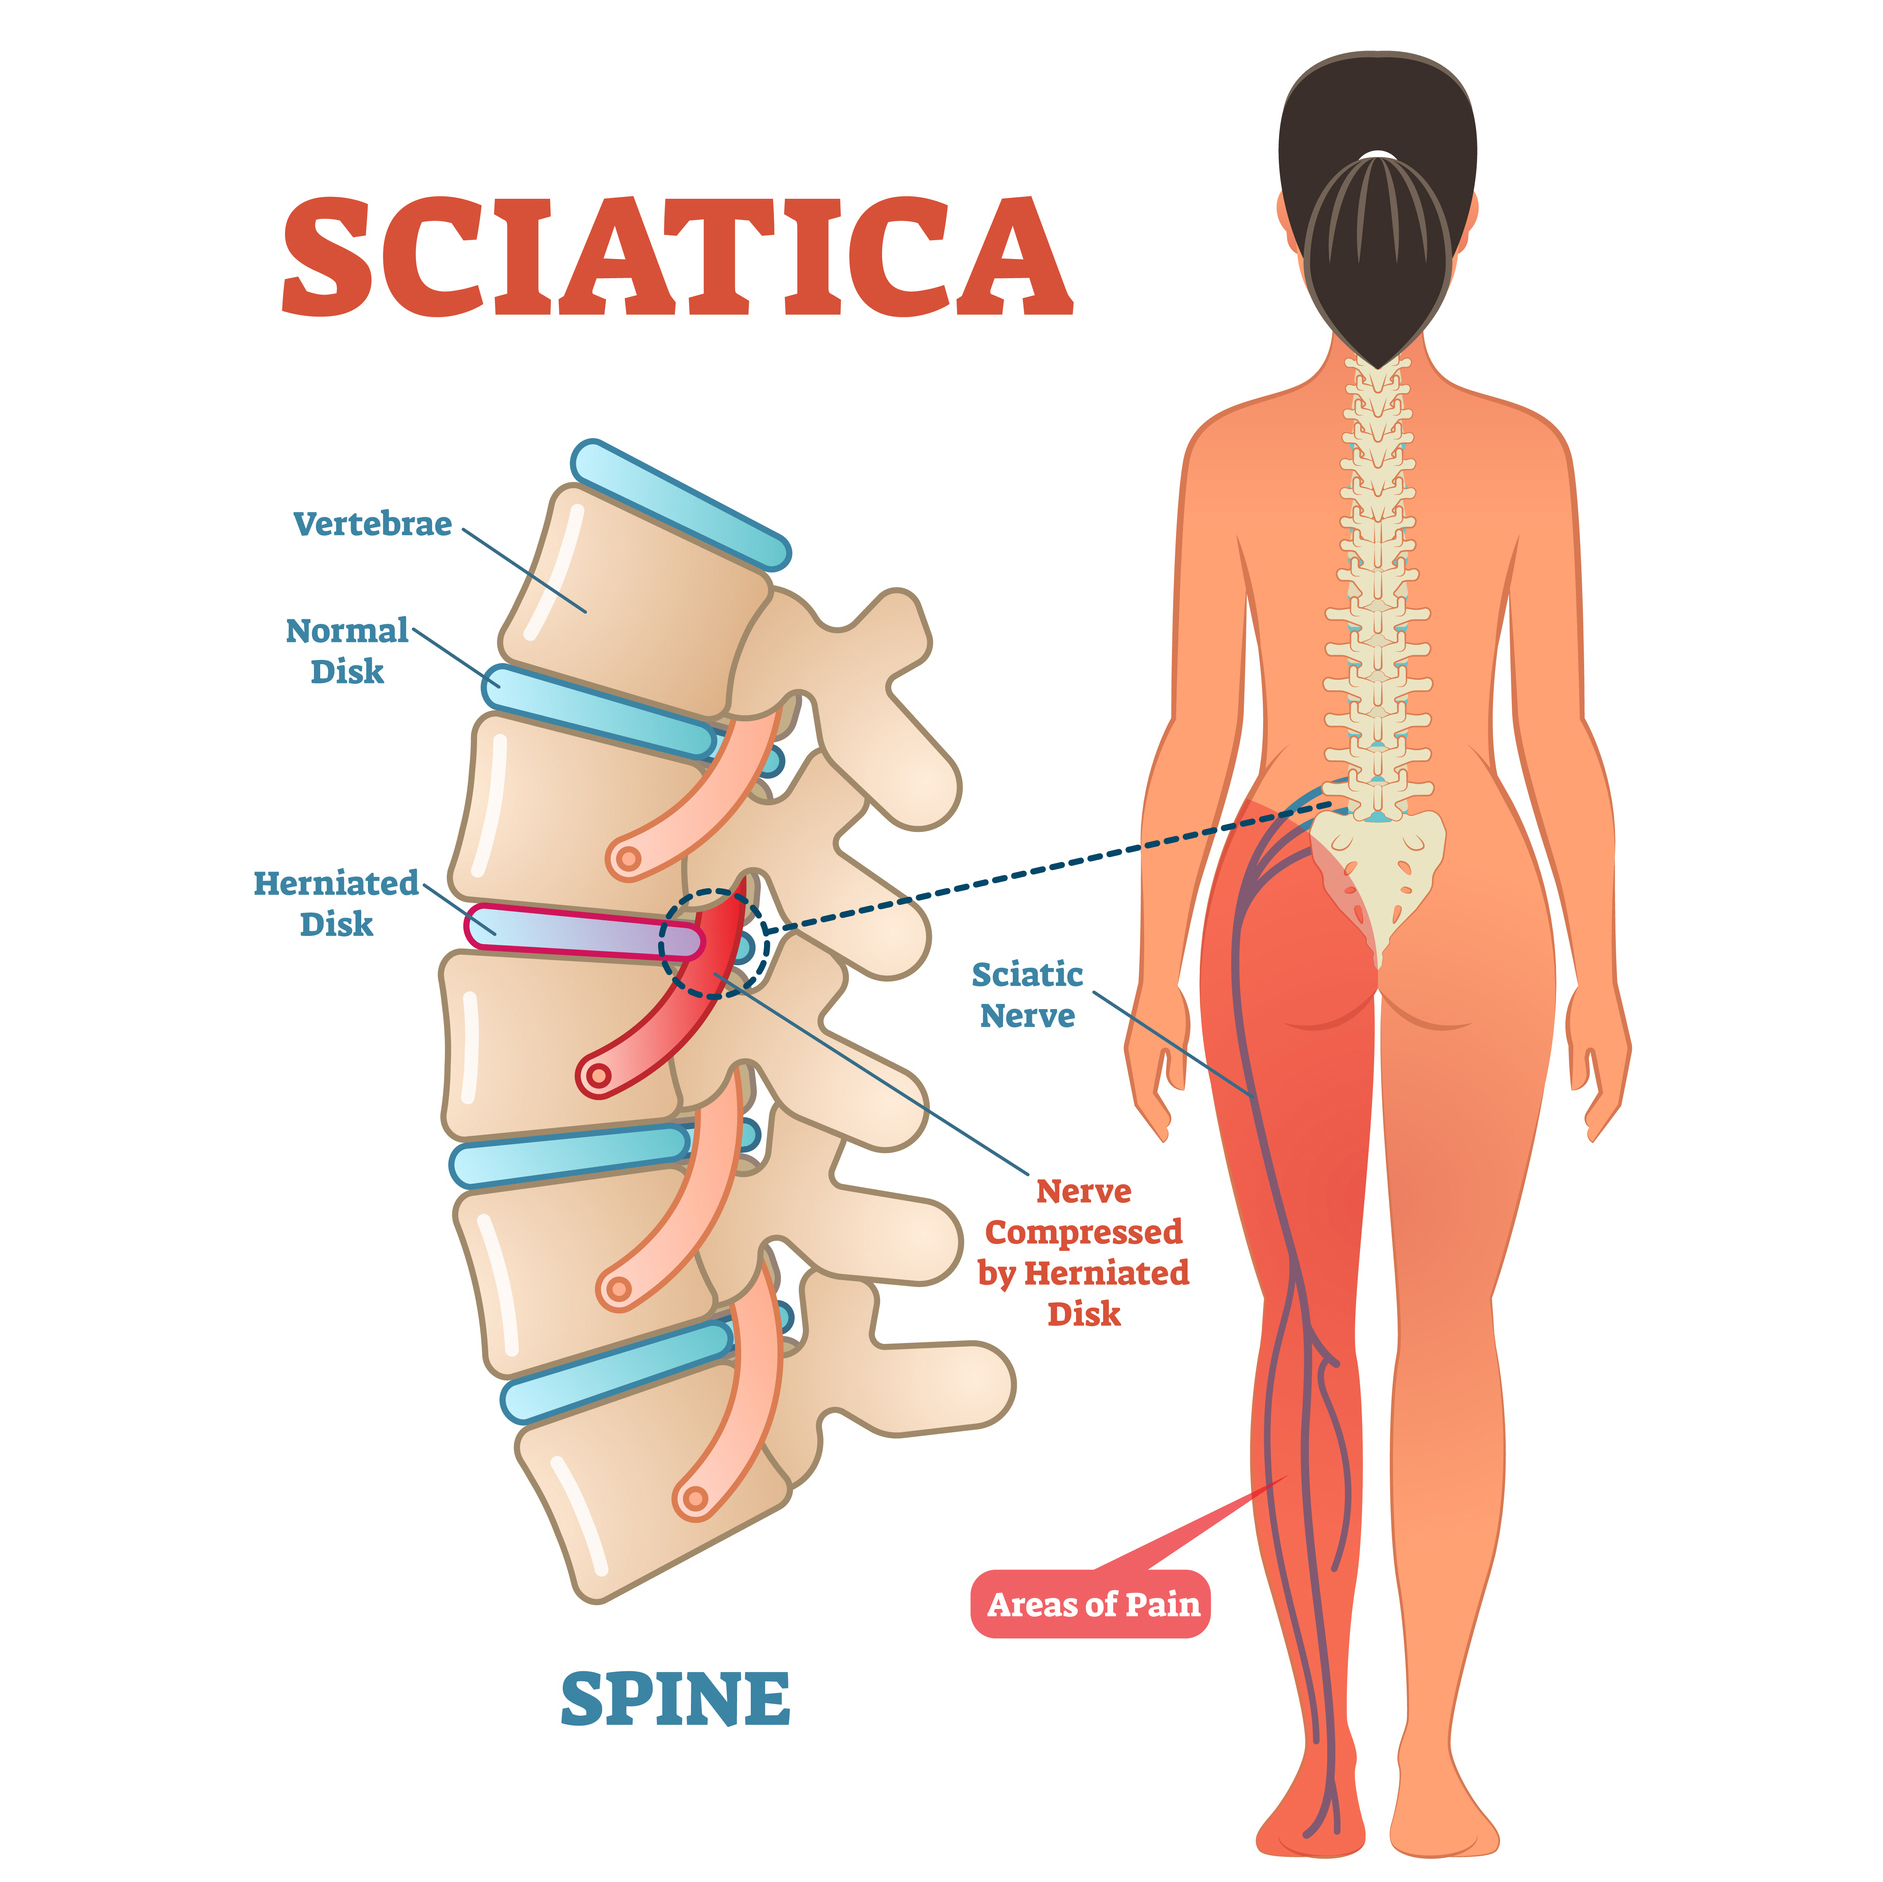 7 Sciatica Stretches a Physical Therapist Swears By - PureWow